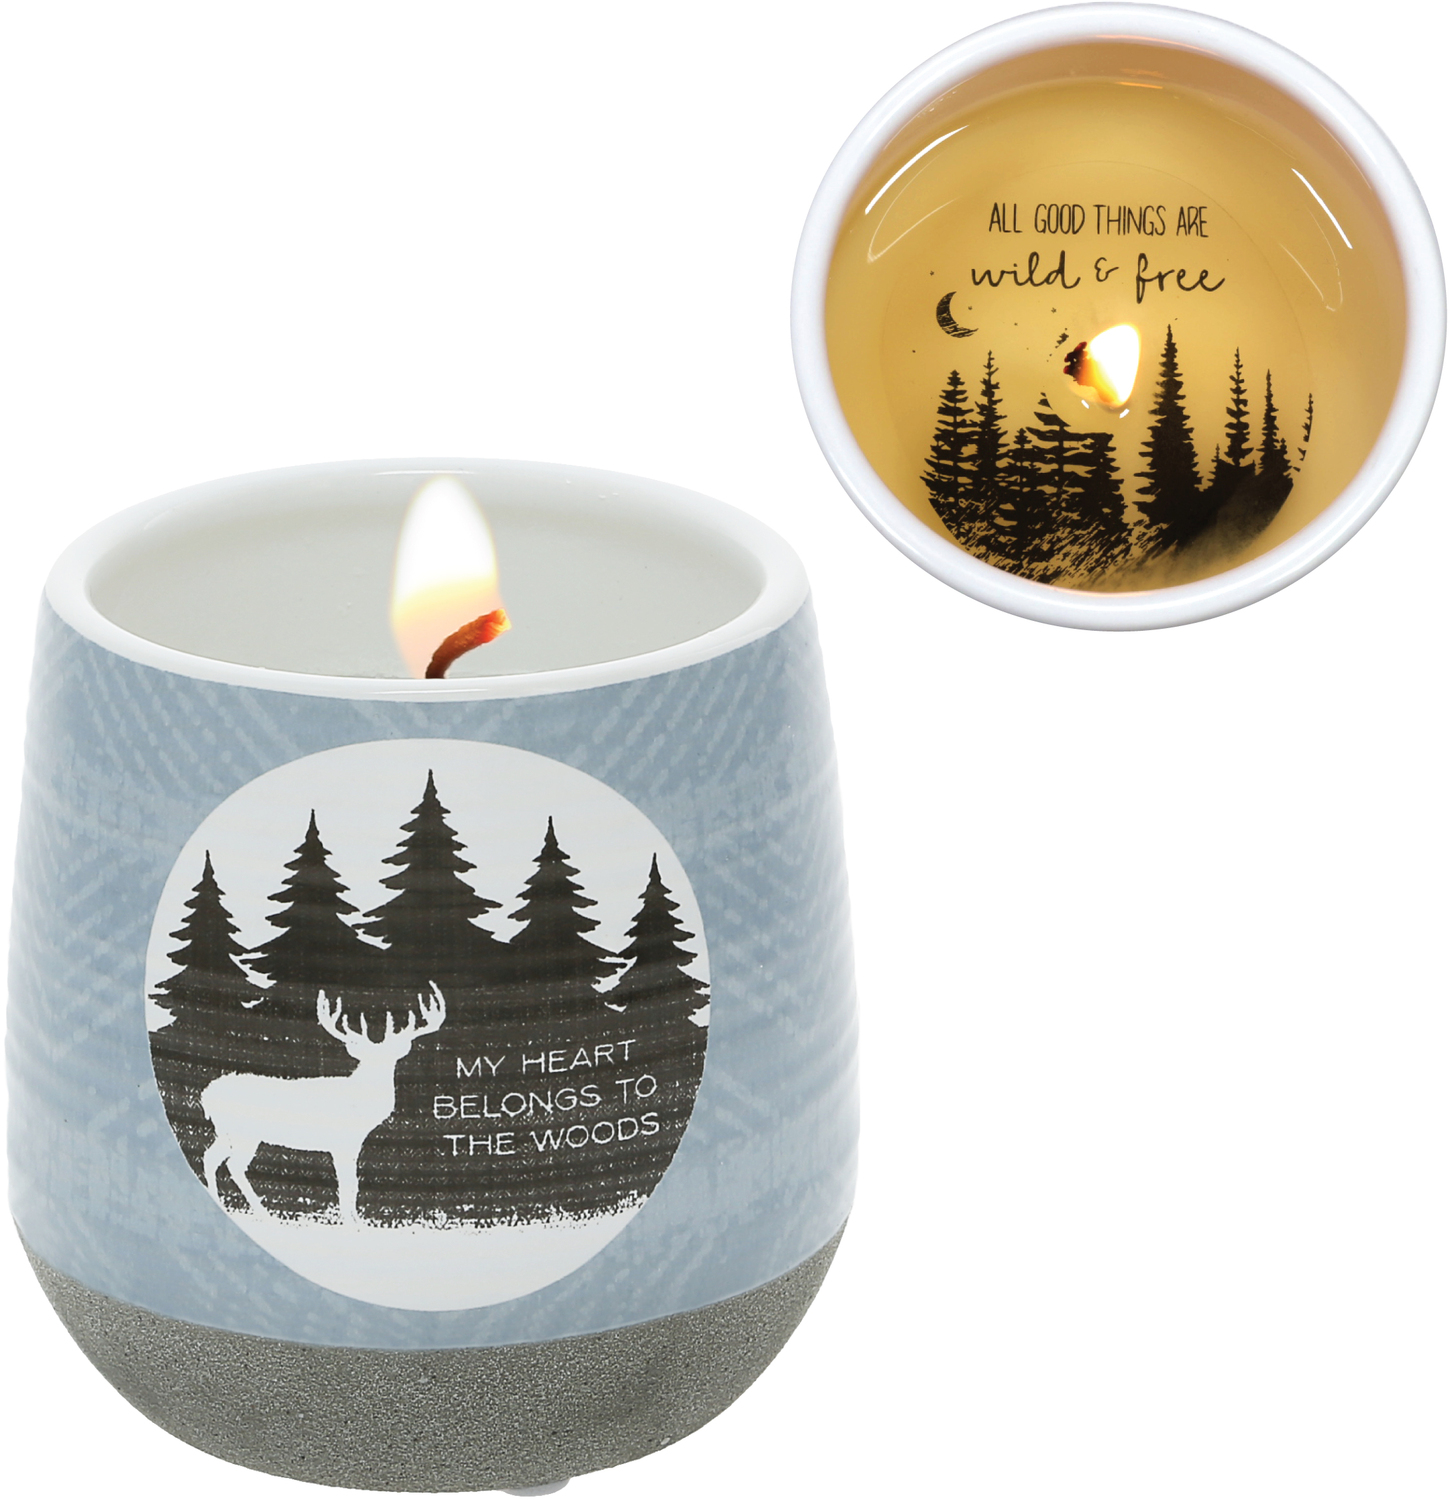 My Heart by Wild Woods Lodge - My Heart - 11 oz - 100% Soy Wax Reveal Candle
Scent: Tranquility